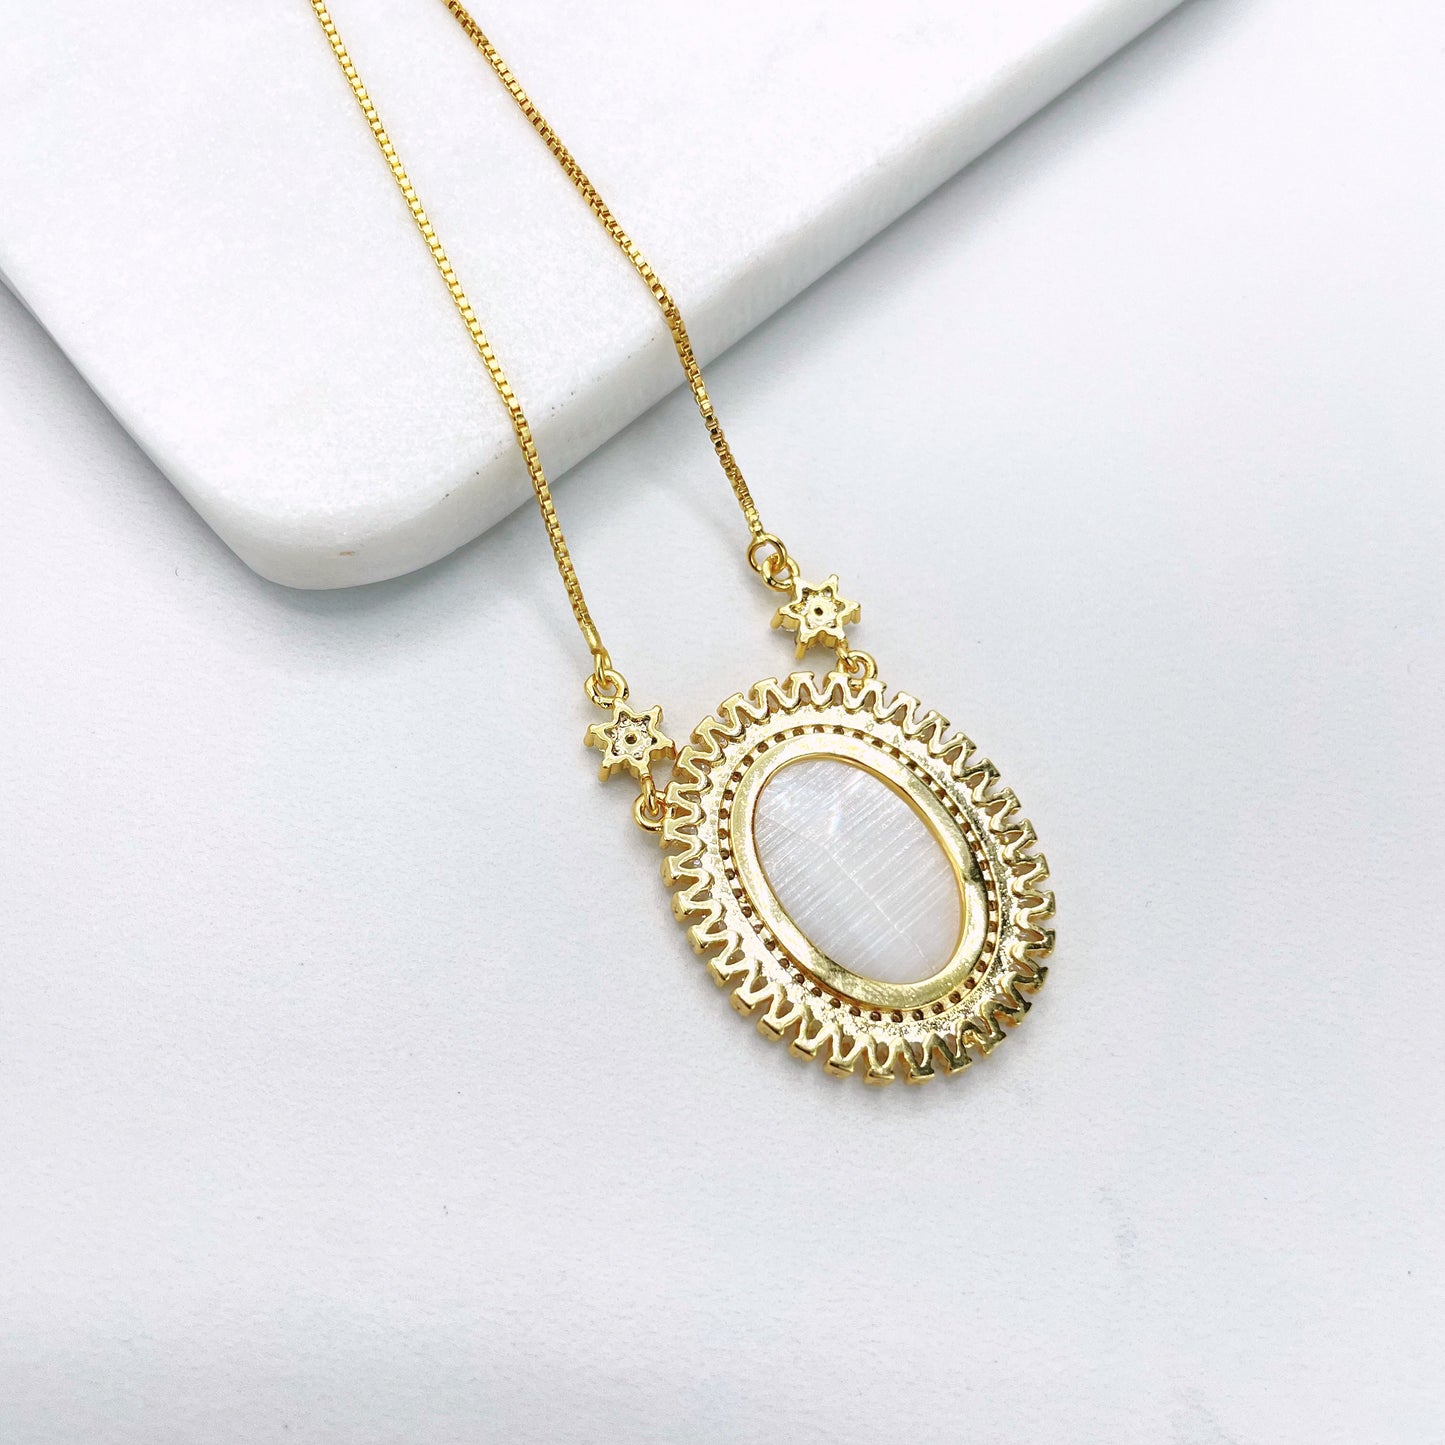 18k Gold Filled 1mm Box Chain, Cubic Zirconia Virgen Milagrosa, Our Lady of Miracles Charms Necklace Wholesale Jewelry Supplies